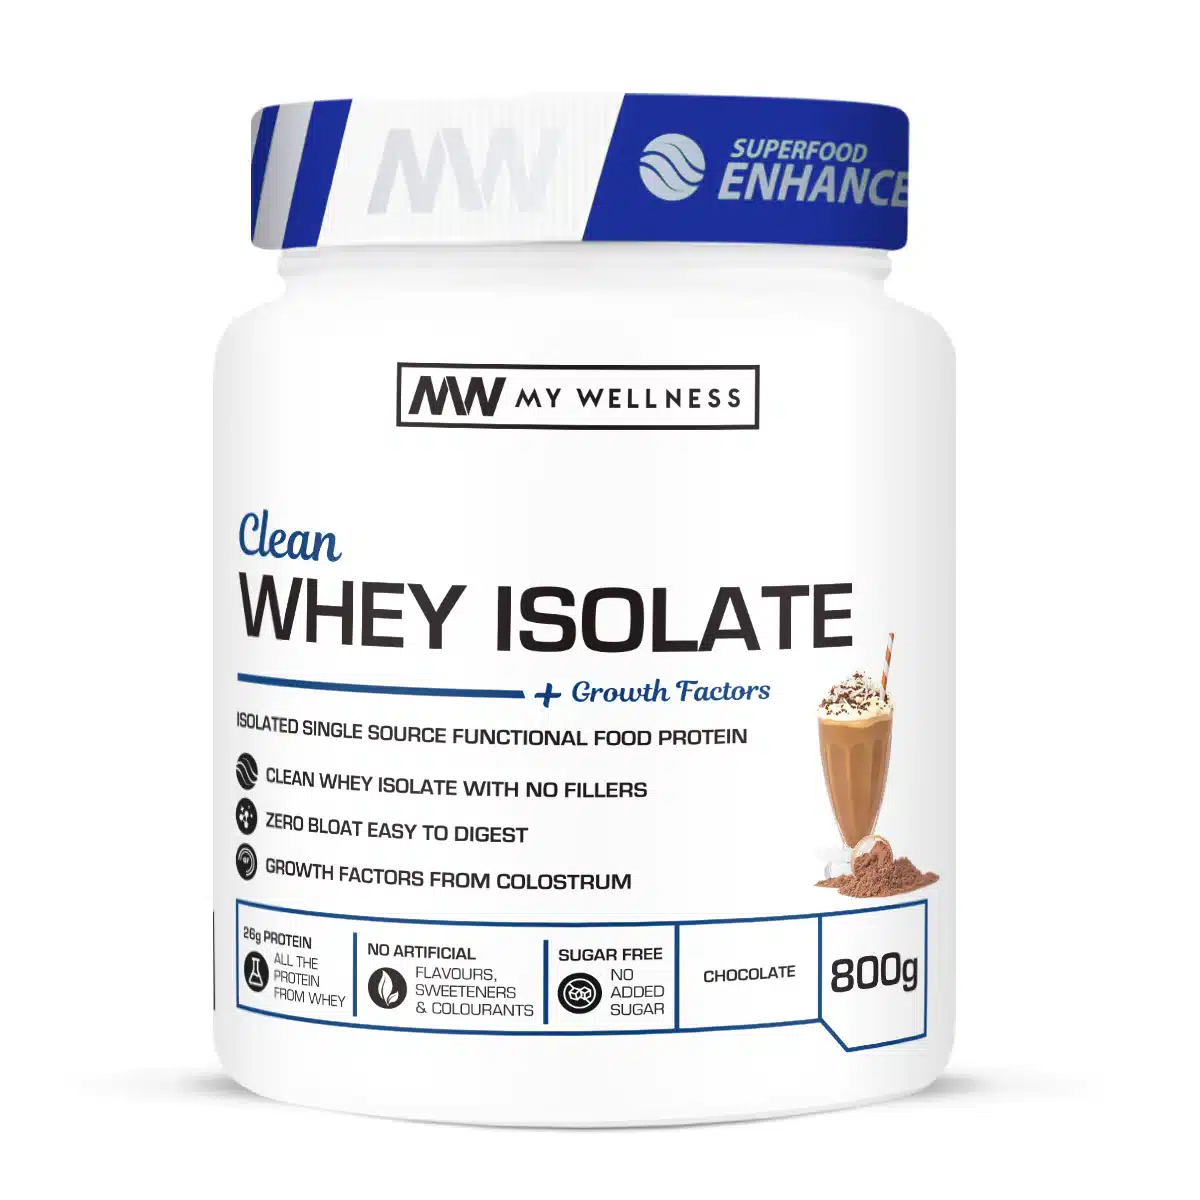 My Wellness - Clean Whey Isolate 800g (with colstrum) - Chocolate